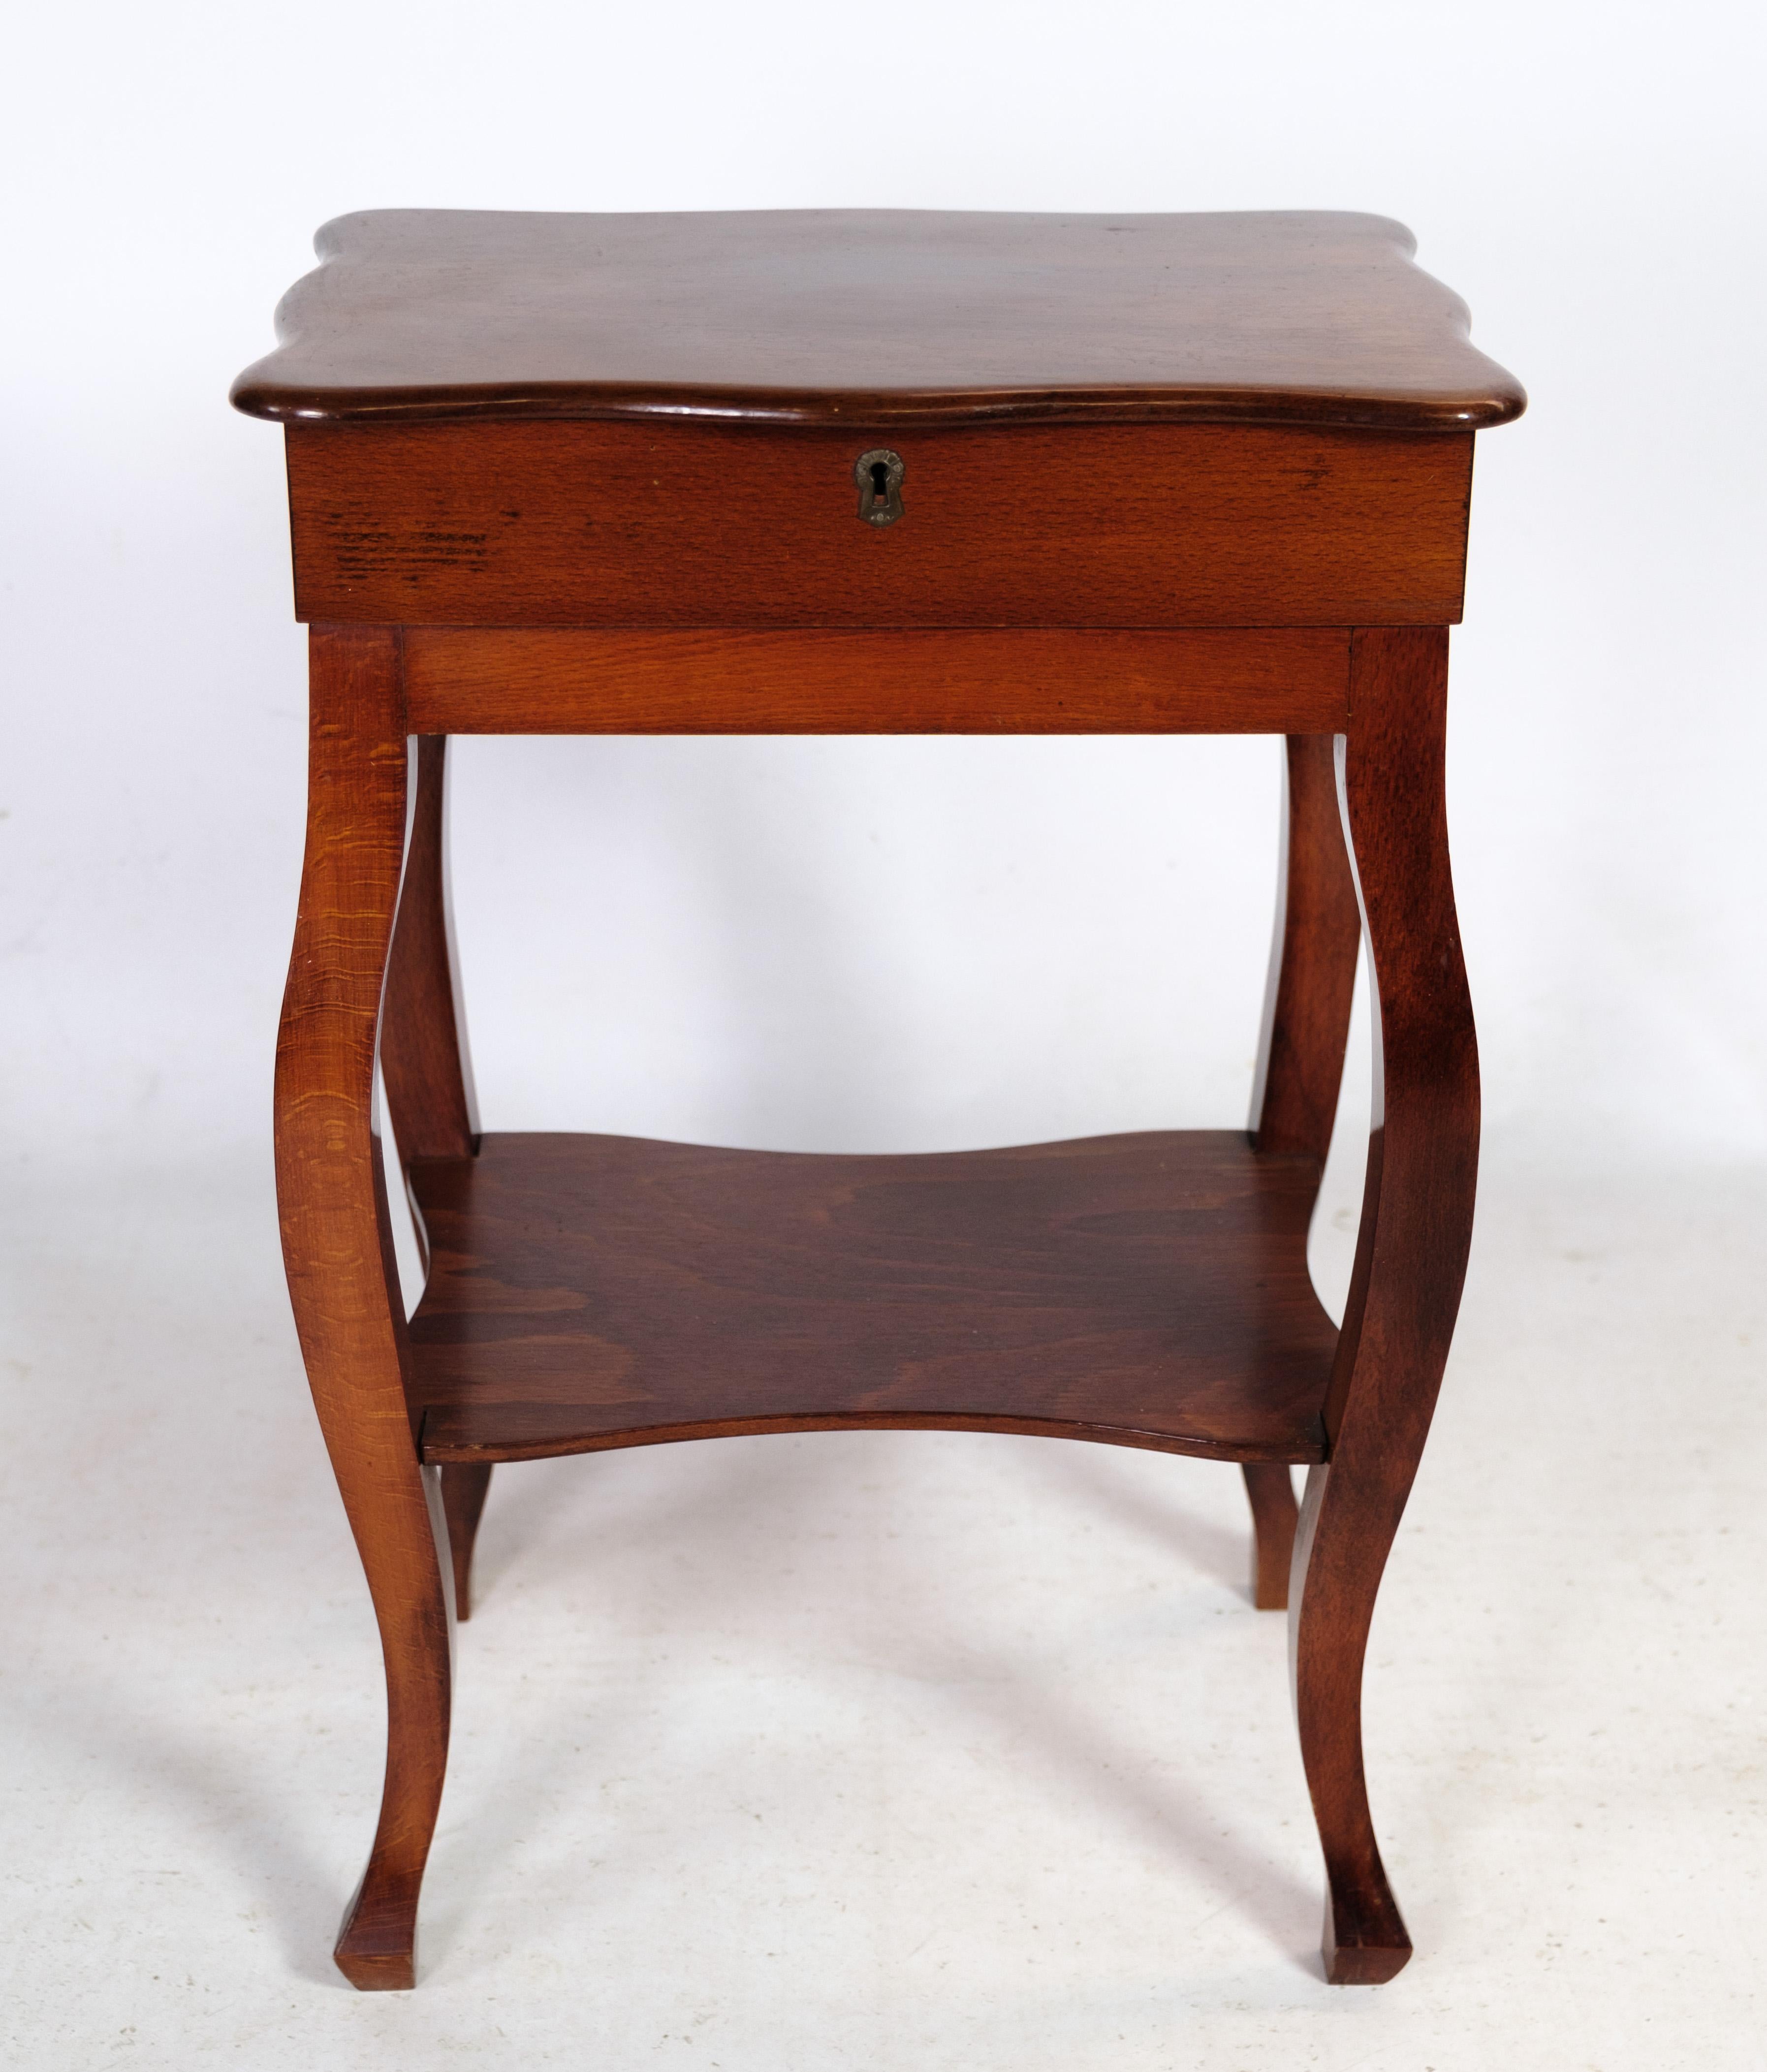 Antique Side Table with a Shelf in Mahogany from Around the 1880 2